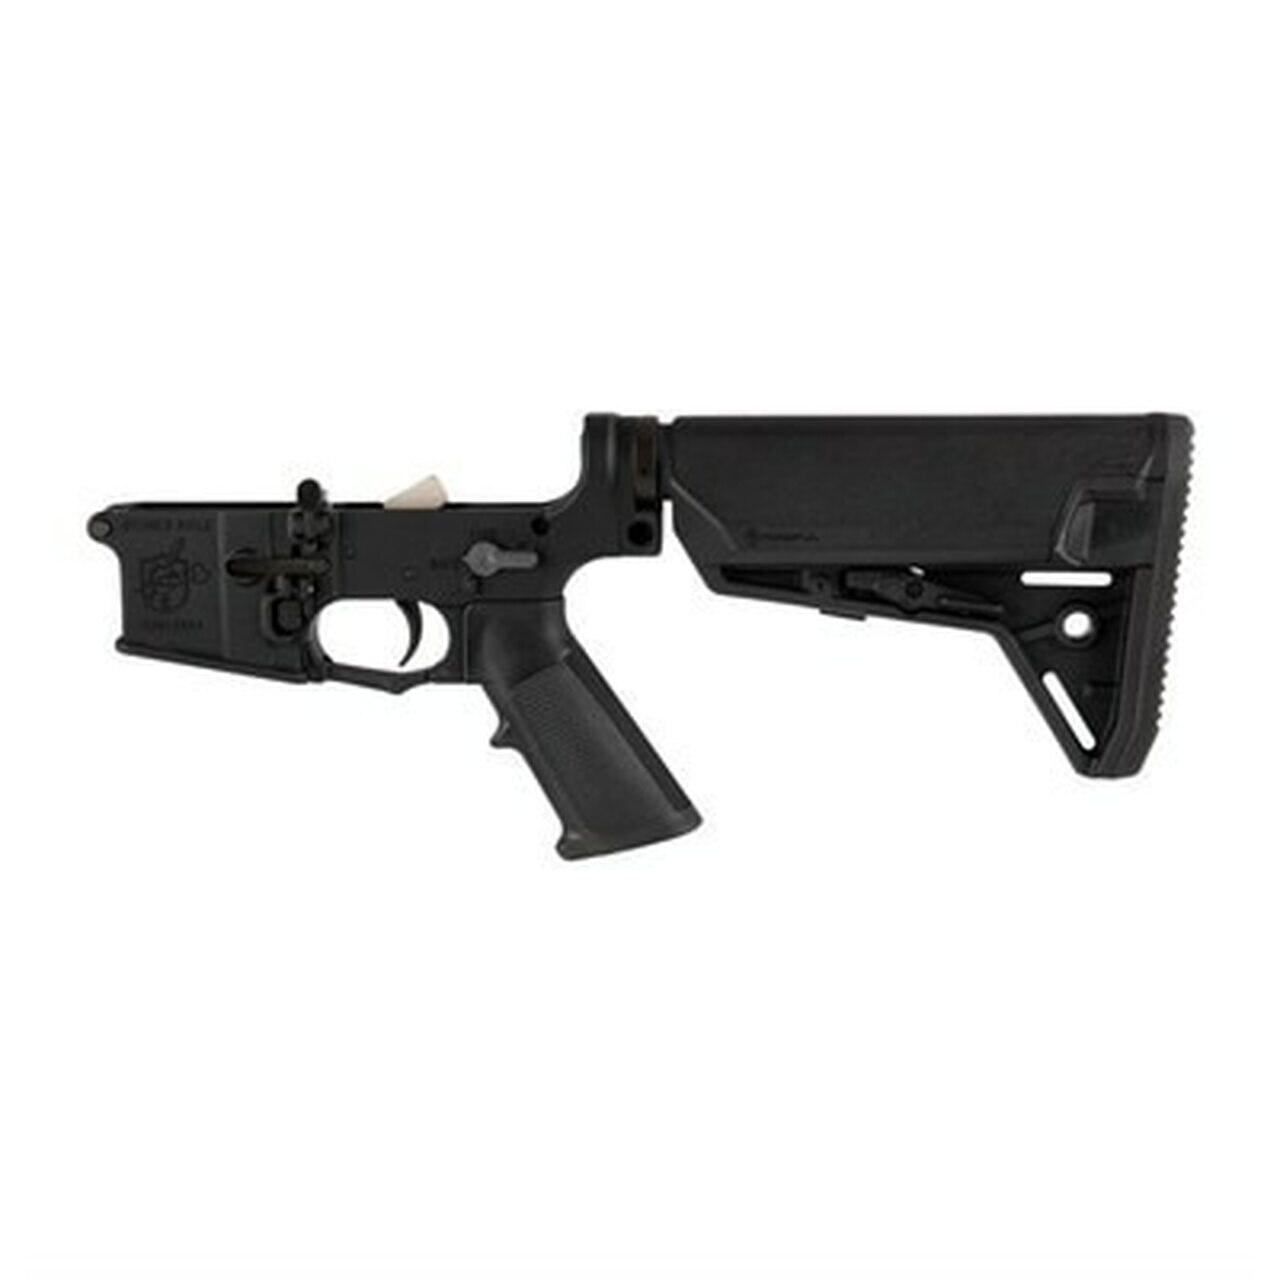 Image of Knights Armament SR-15 Lower Receiver Complete Assembly 223/5.56, Black, Magpul SL-S Stock